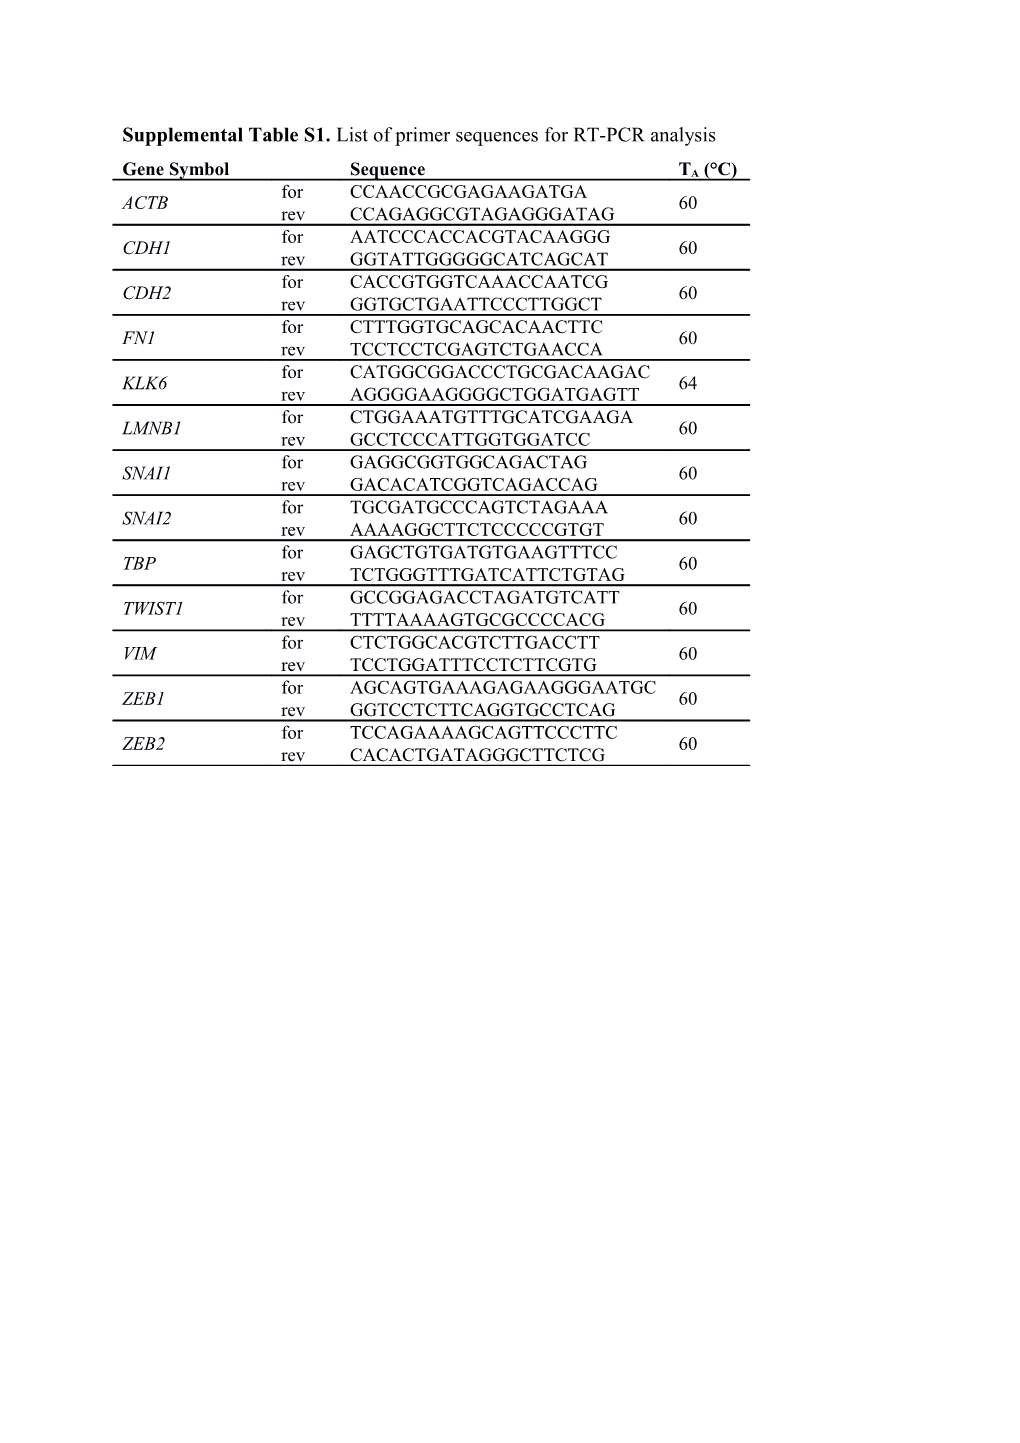 Supplemental Table S1. List of Primer Sequences for RT-PCR Analysis